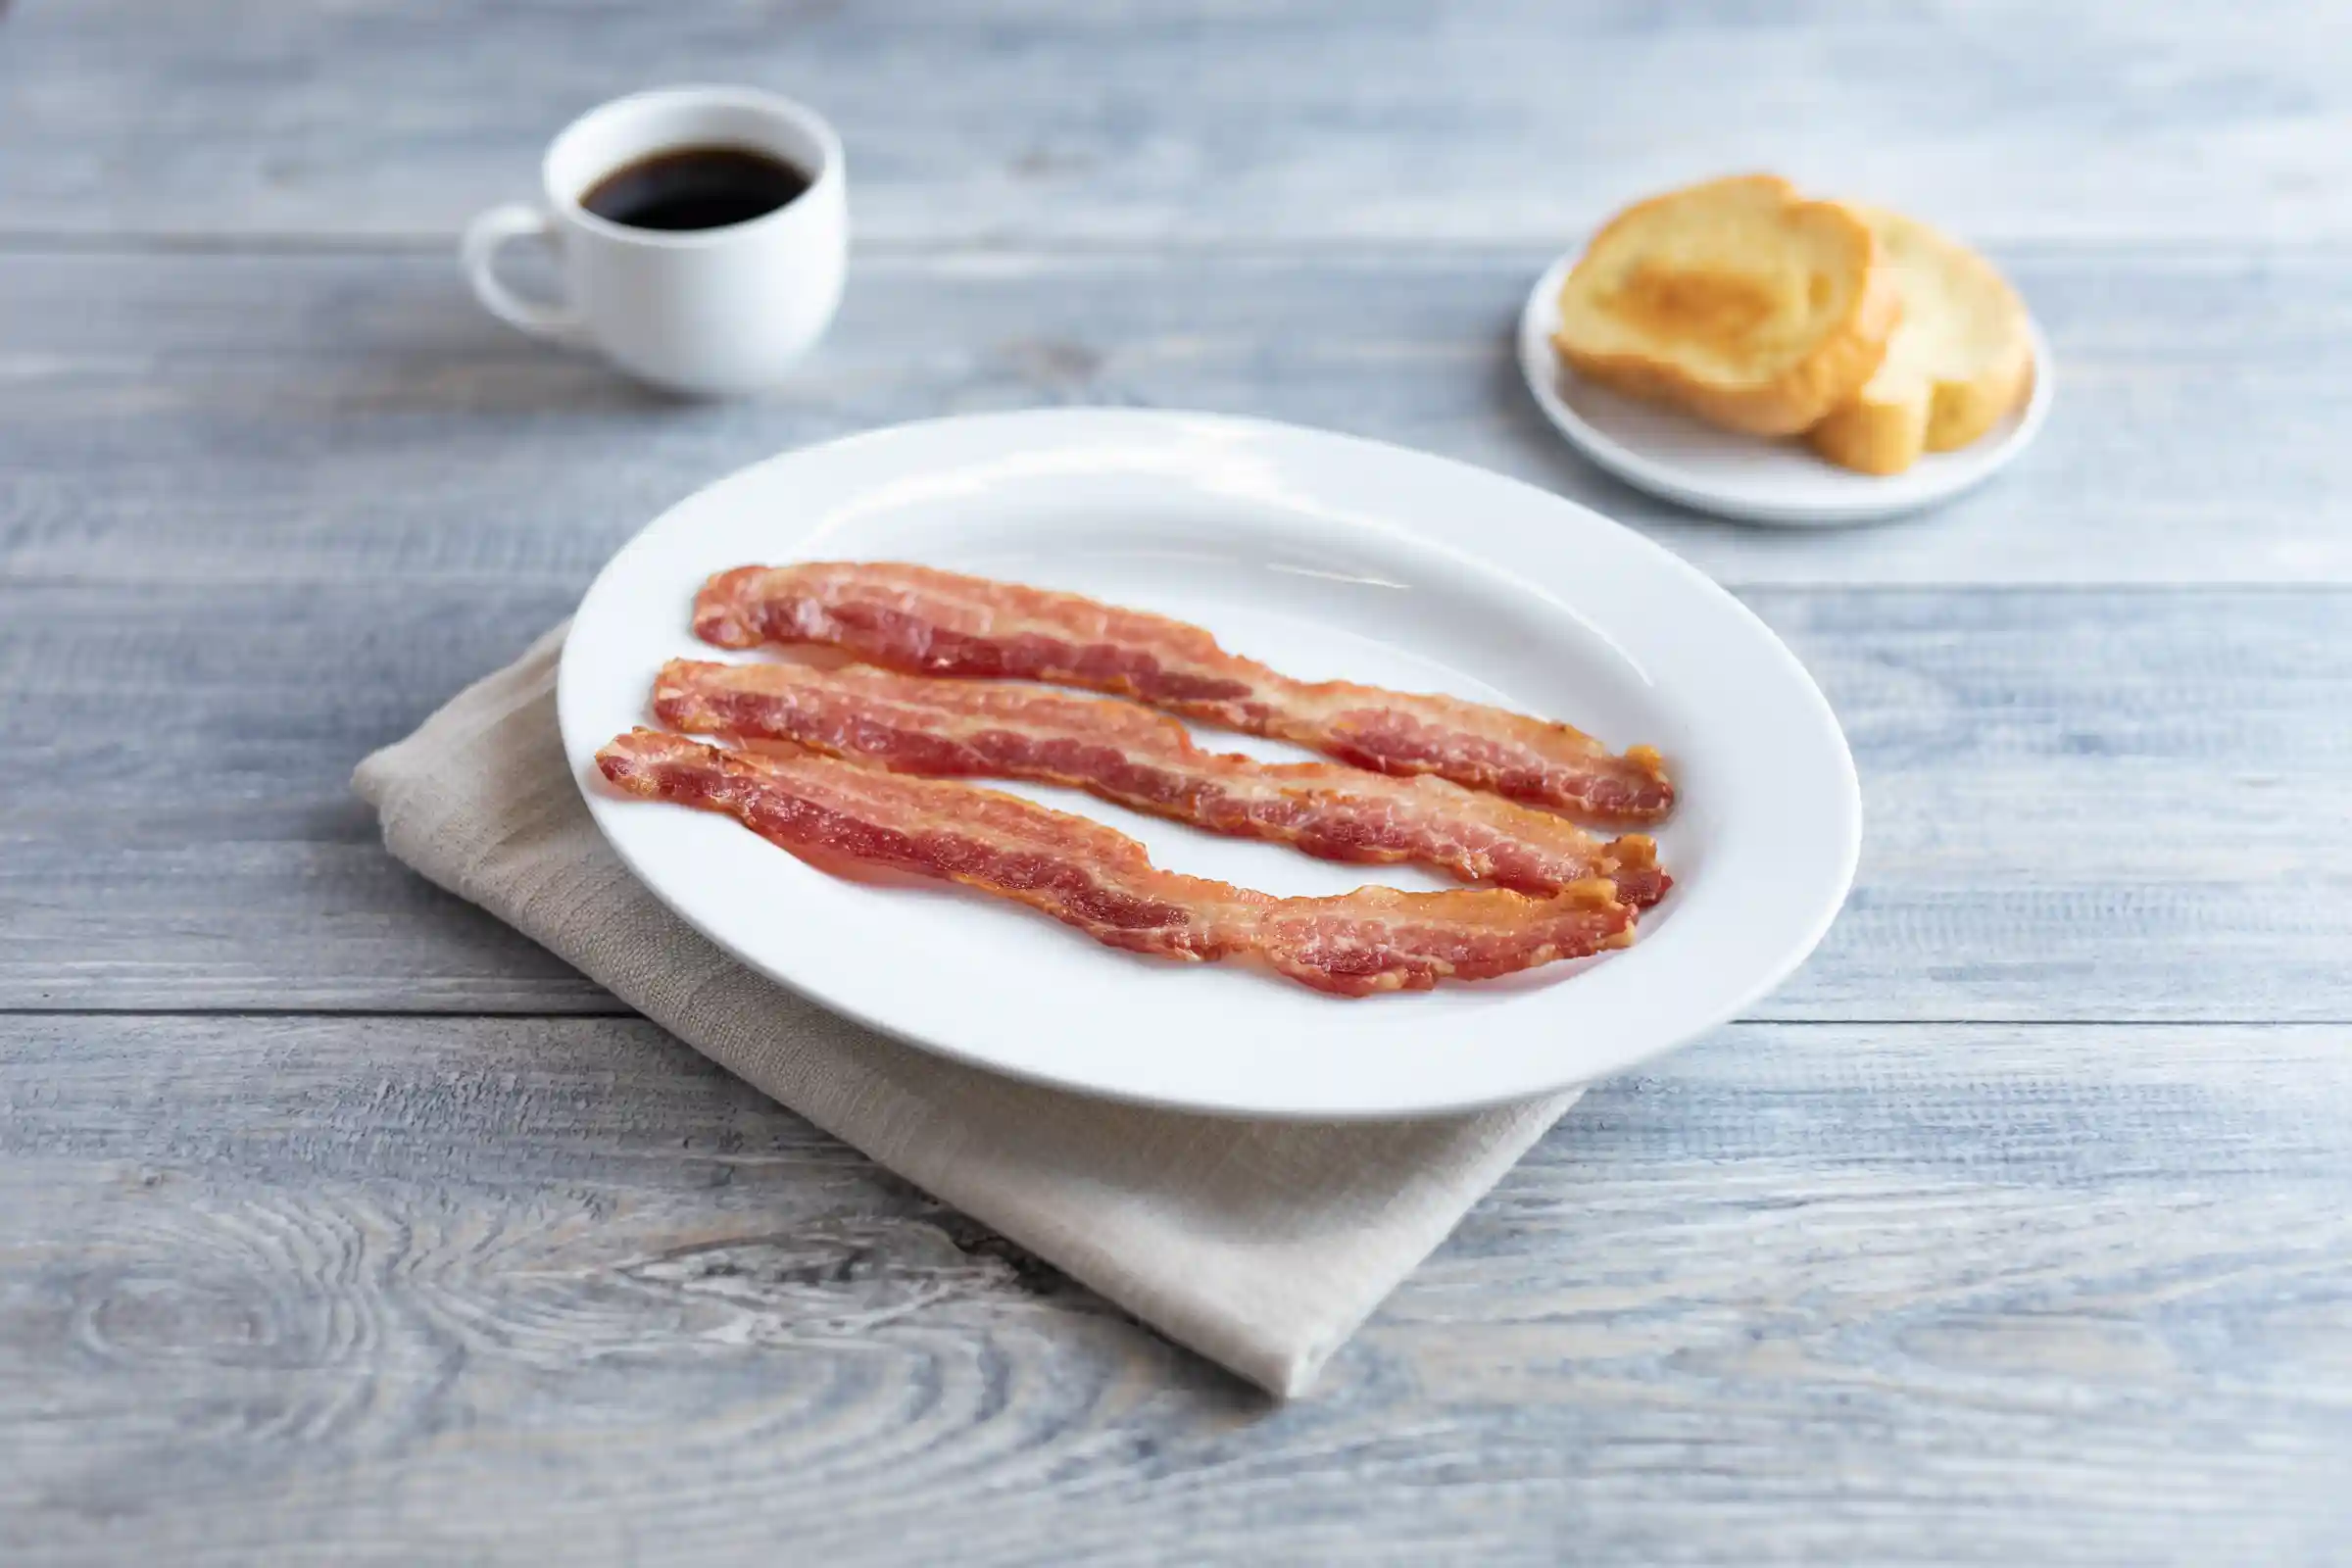 Wright® Brand Naturally Hickory Smoked Regular Sliced Bacon, Bulk, 15 Lbs, 14-18 Slices per Pound, Gas Flushed_image_01